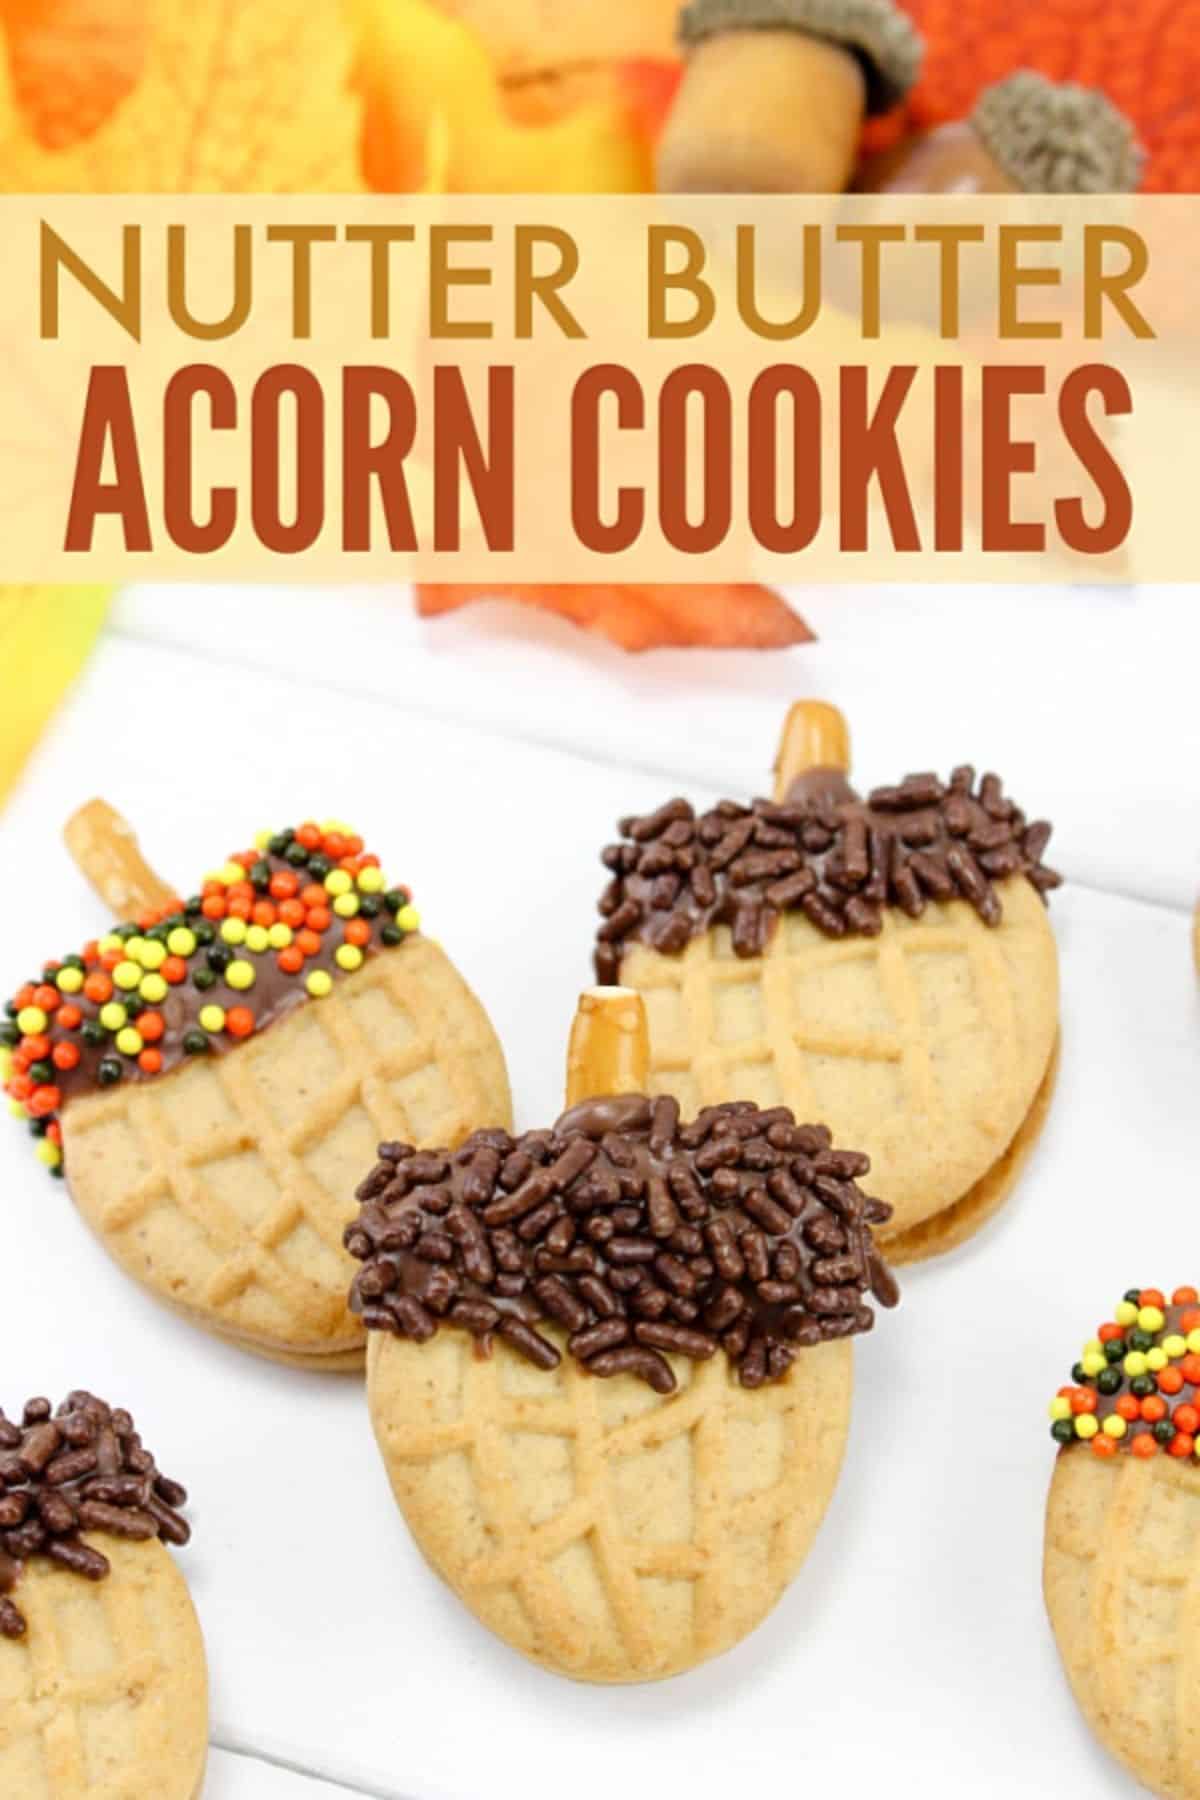 nutter butter acorns cookies with title text reading Nutter Butter Acorn Cookies.